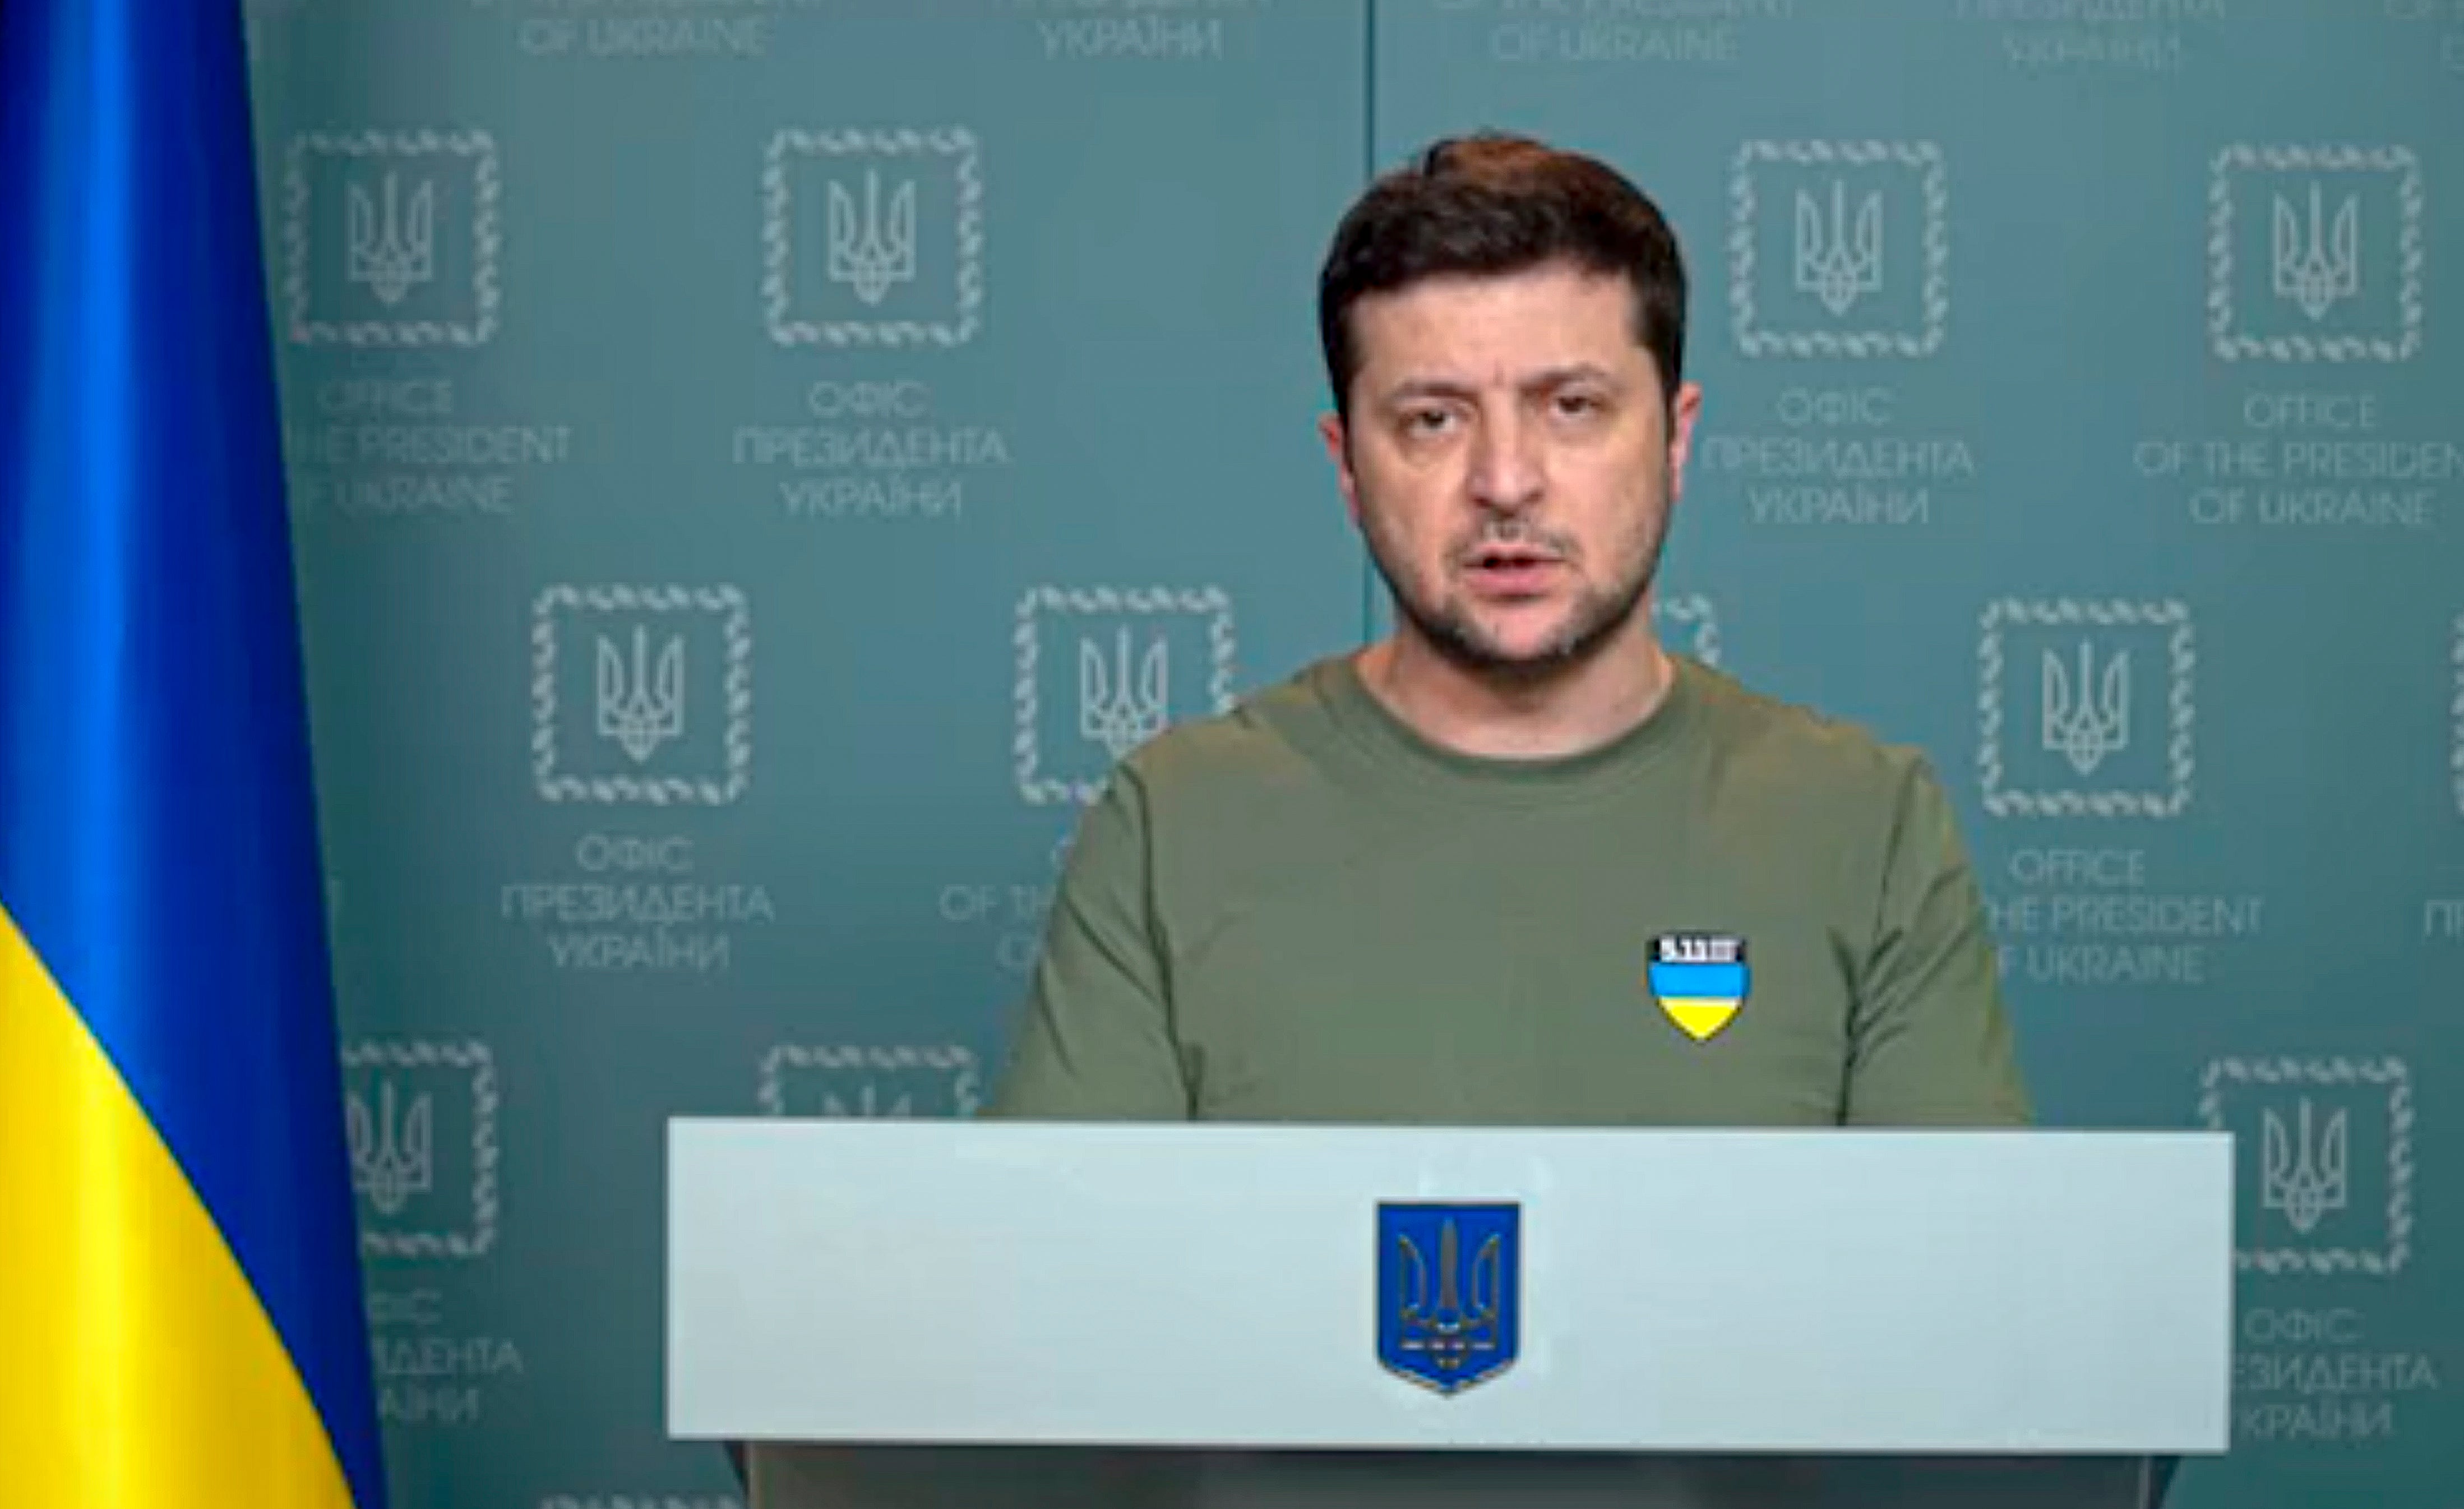 Volodymyr Zelensky condemned Russia’s attack as ‘nuclear terrorism’